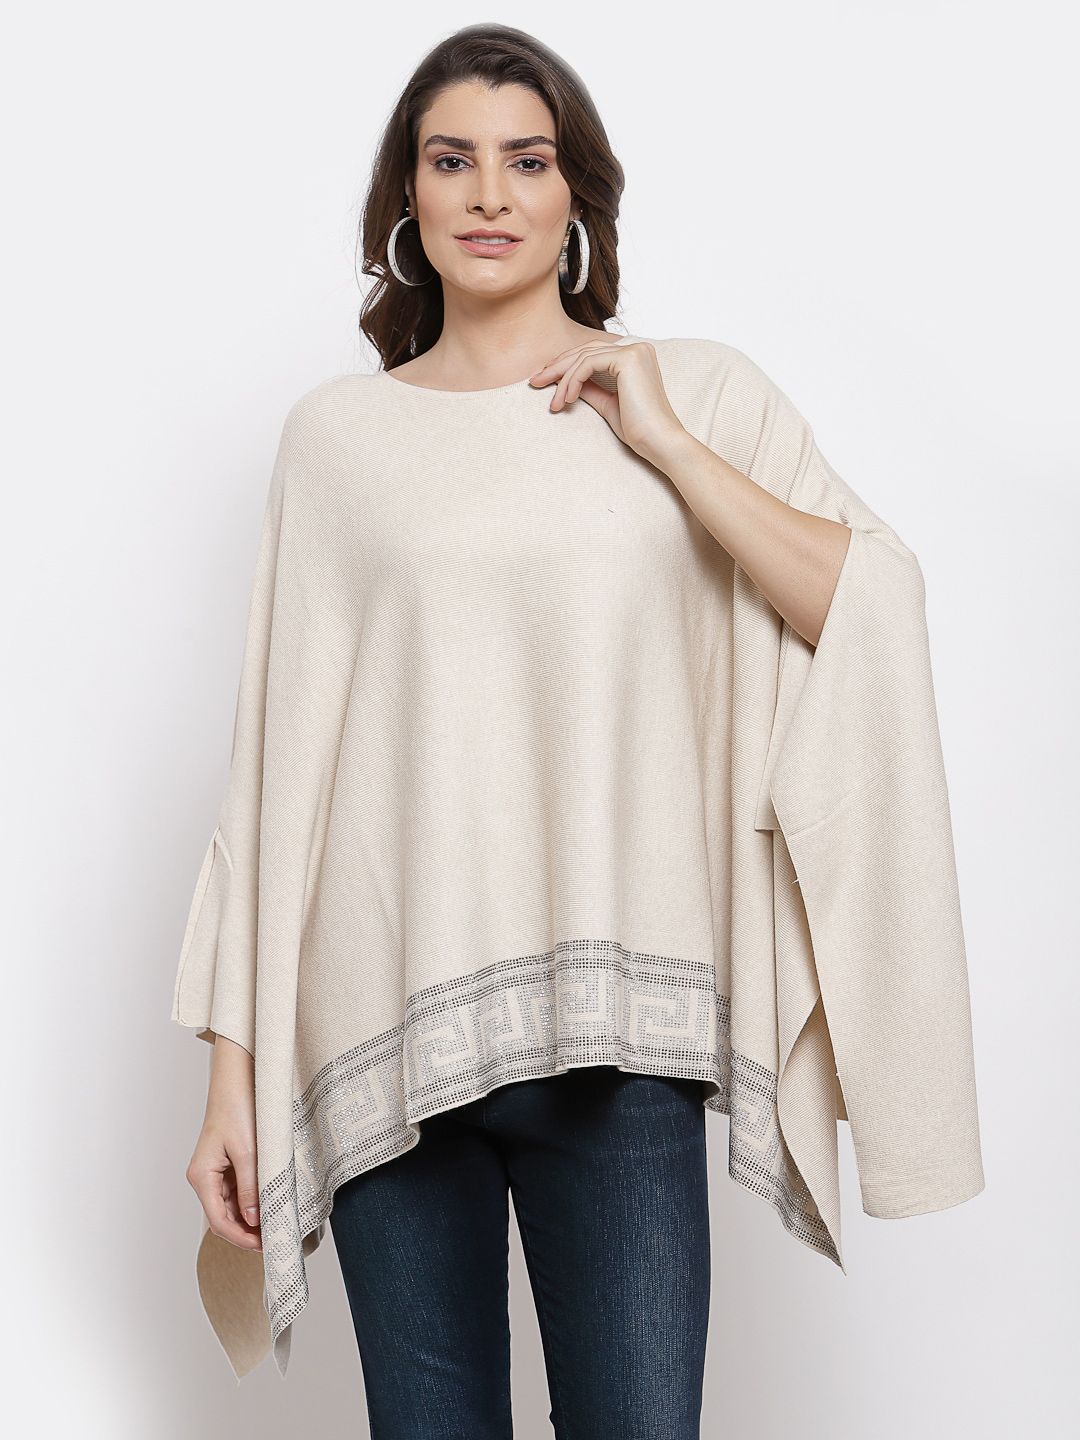 Mafadeny Women Off White Poncho with Embellished Detail Price in India